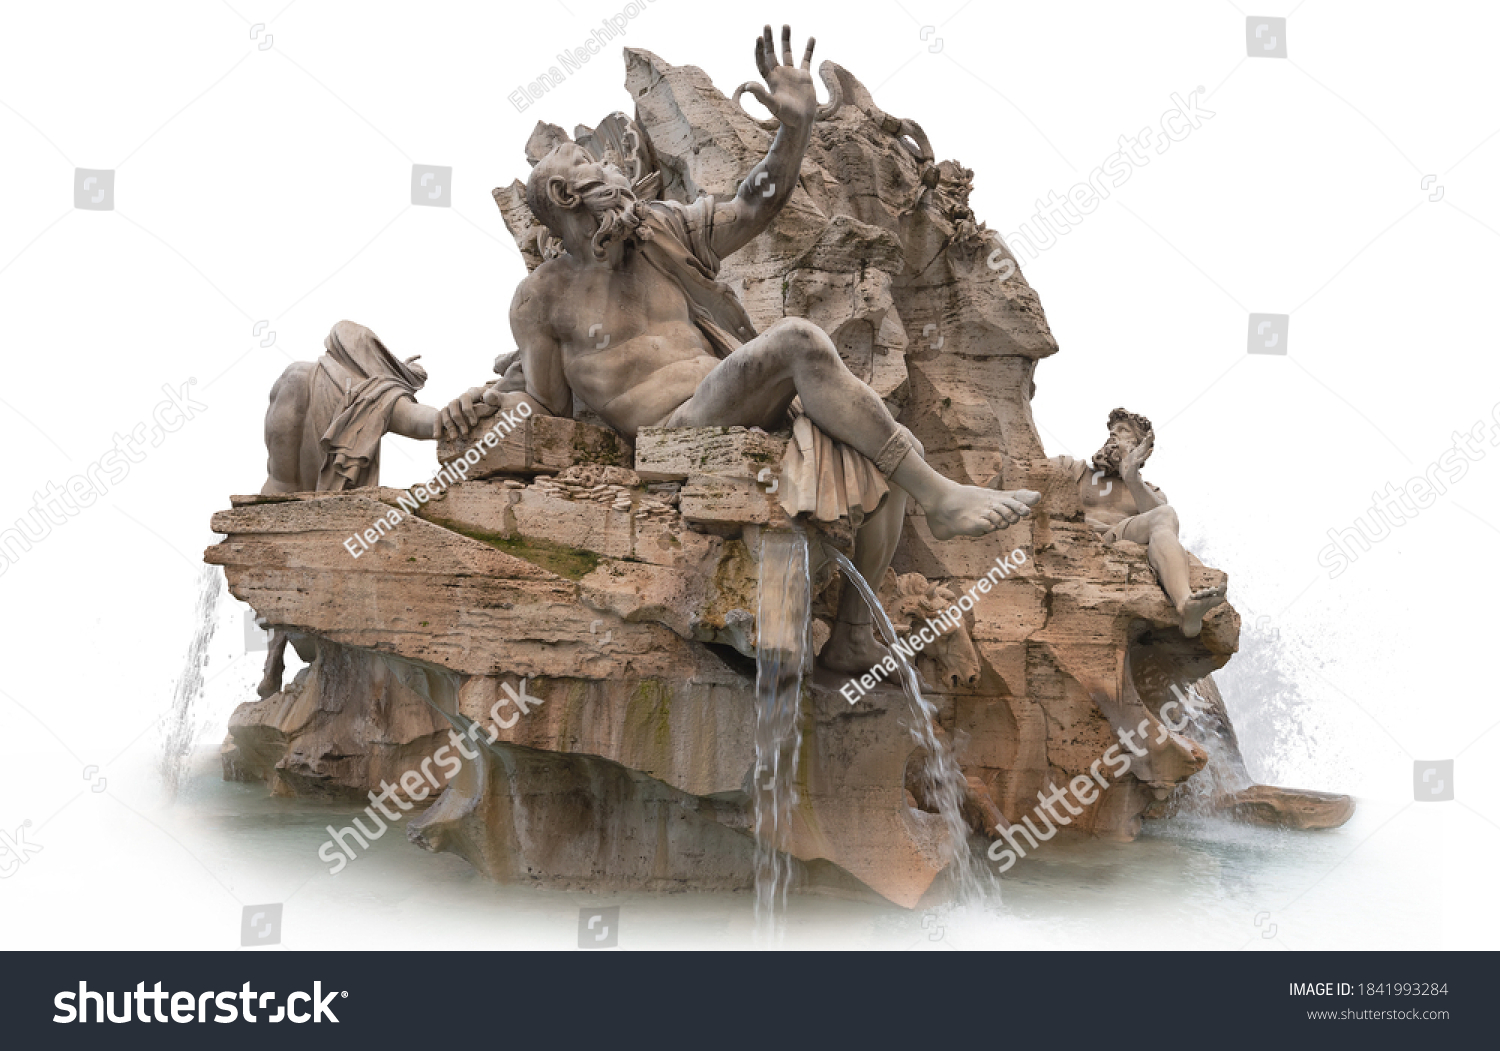 The fountain of the Four Rivers by Bernini in Piazza Navona isolated on a white background. Element for advertisement, poster and more. #1841993284